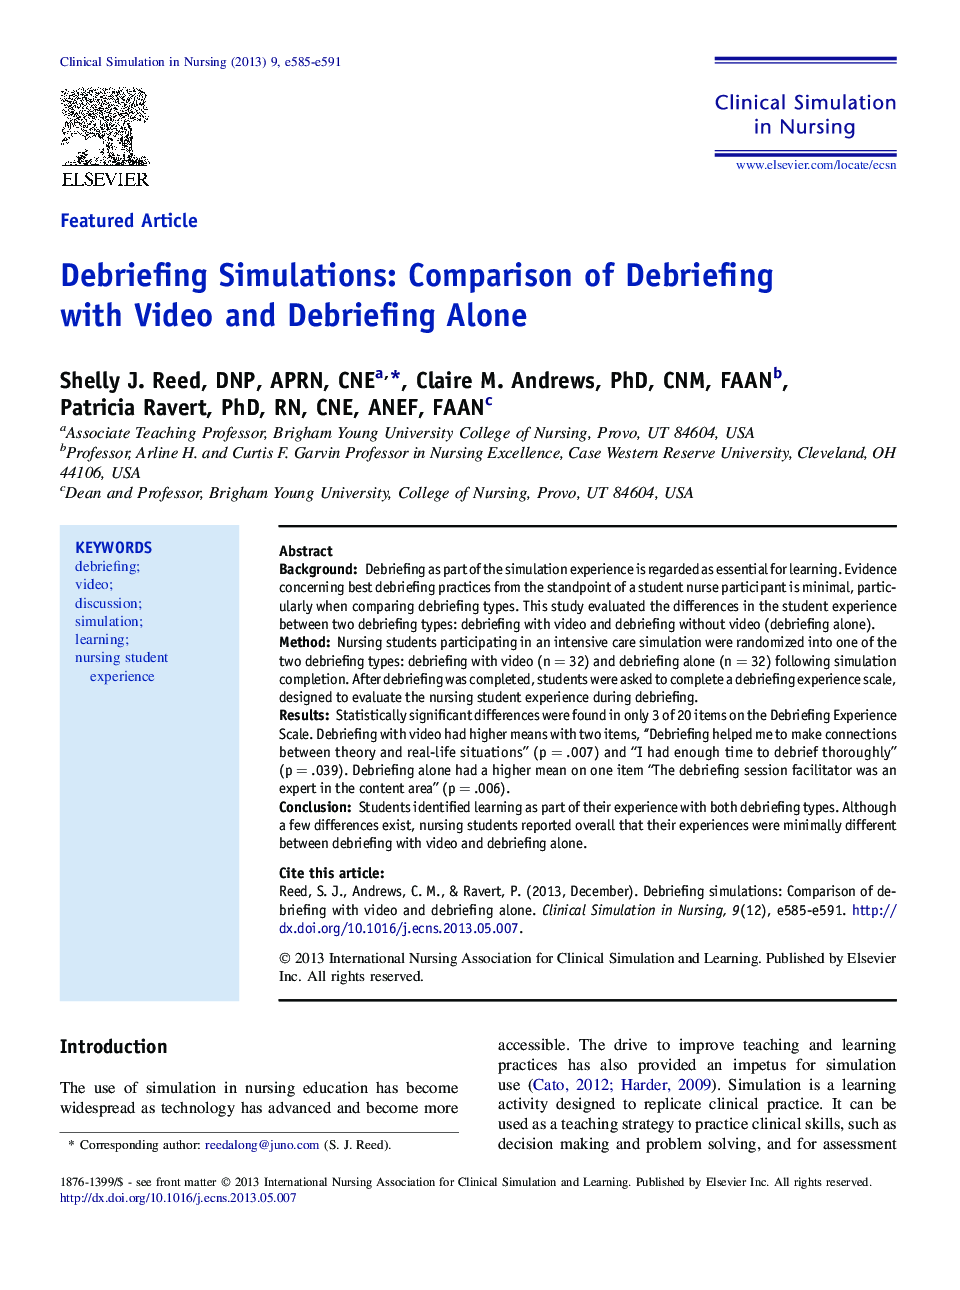 Debriefing Simulations: Comparison of Debriefing with Video and Debriefing Alone